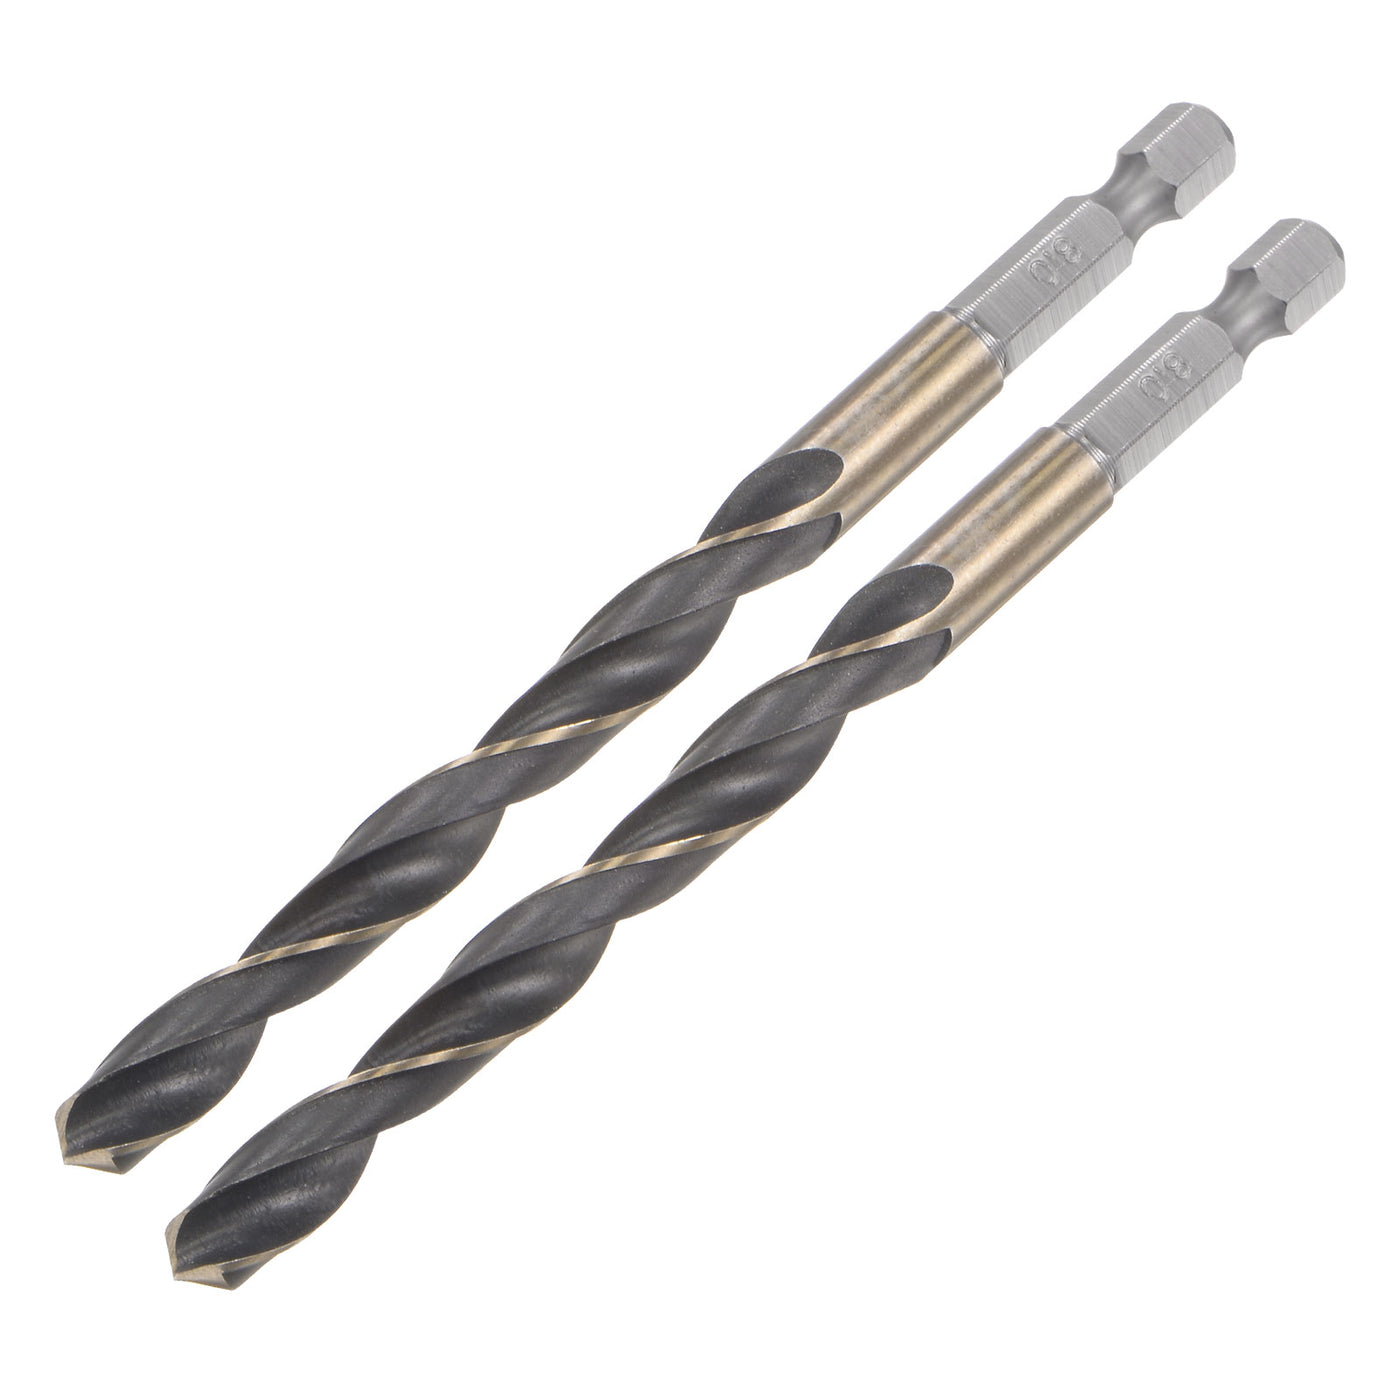 uxcell Uxcell 2Pcs 8mm High Speed Steel Twist Drill Bit with Hex Shank 116mm Length